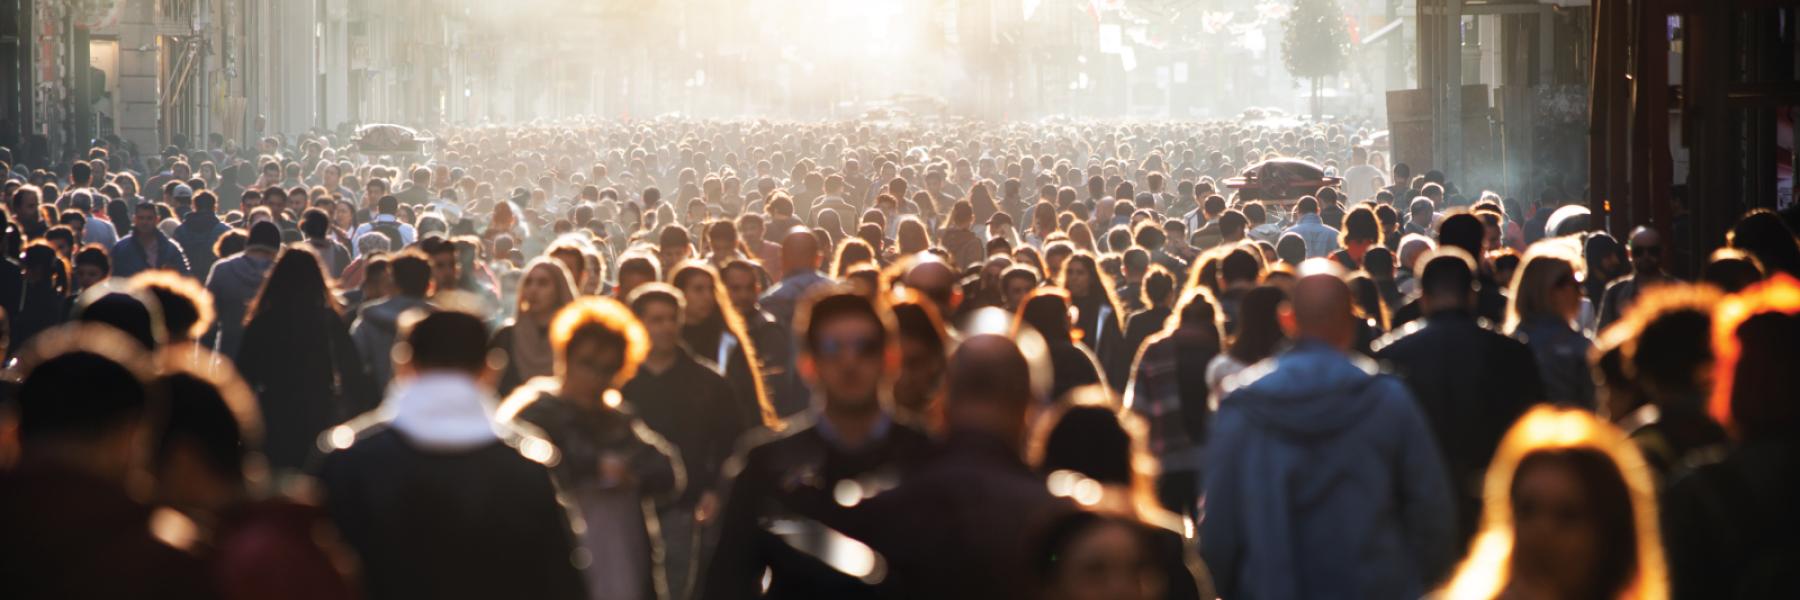 Image of a large crowd of people walking outside in a city block setting